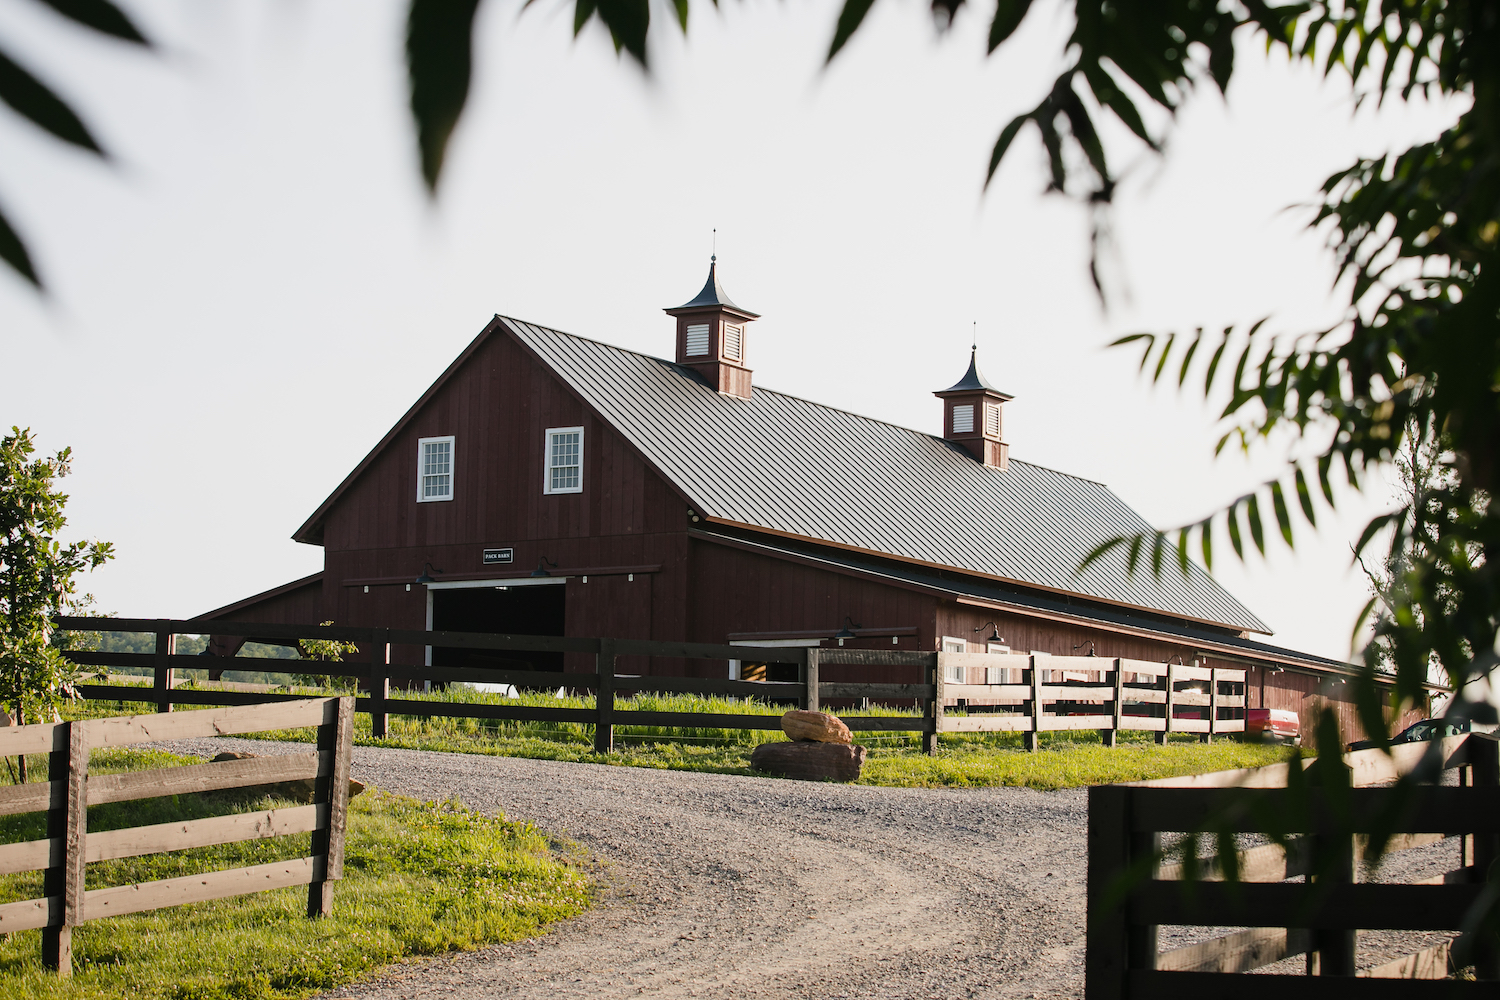 How the garden, kitchen, and animal farm comes together to create a delicious experience at Philo Ridge Farm in Charlotte, Vermont.